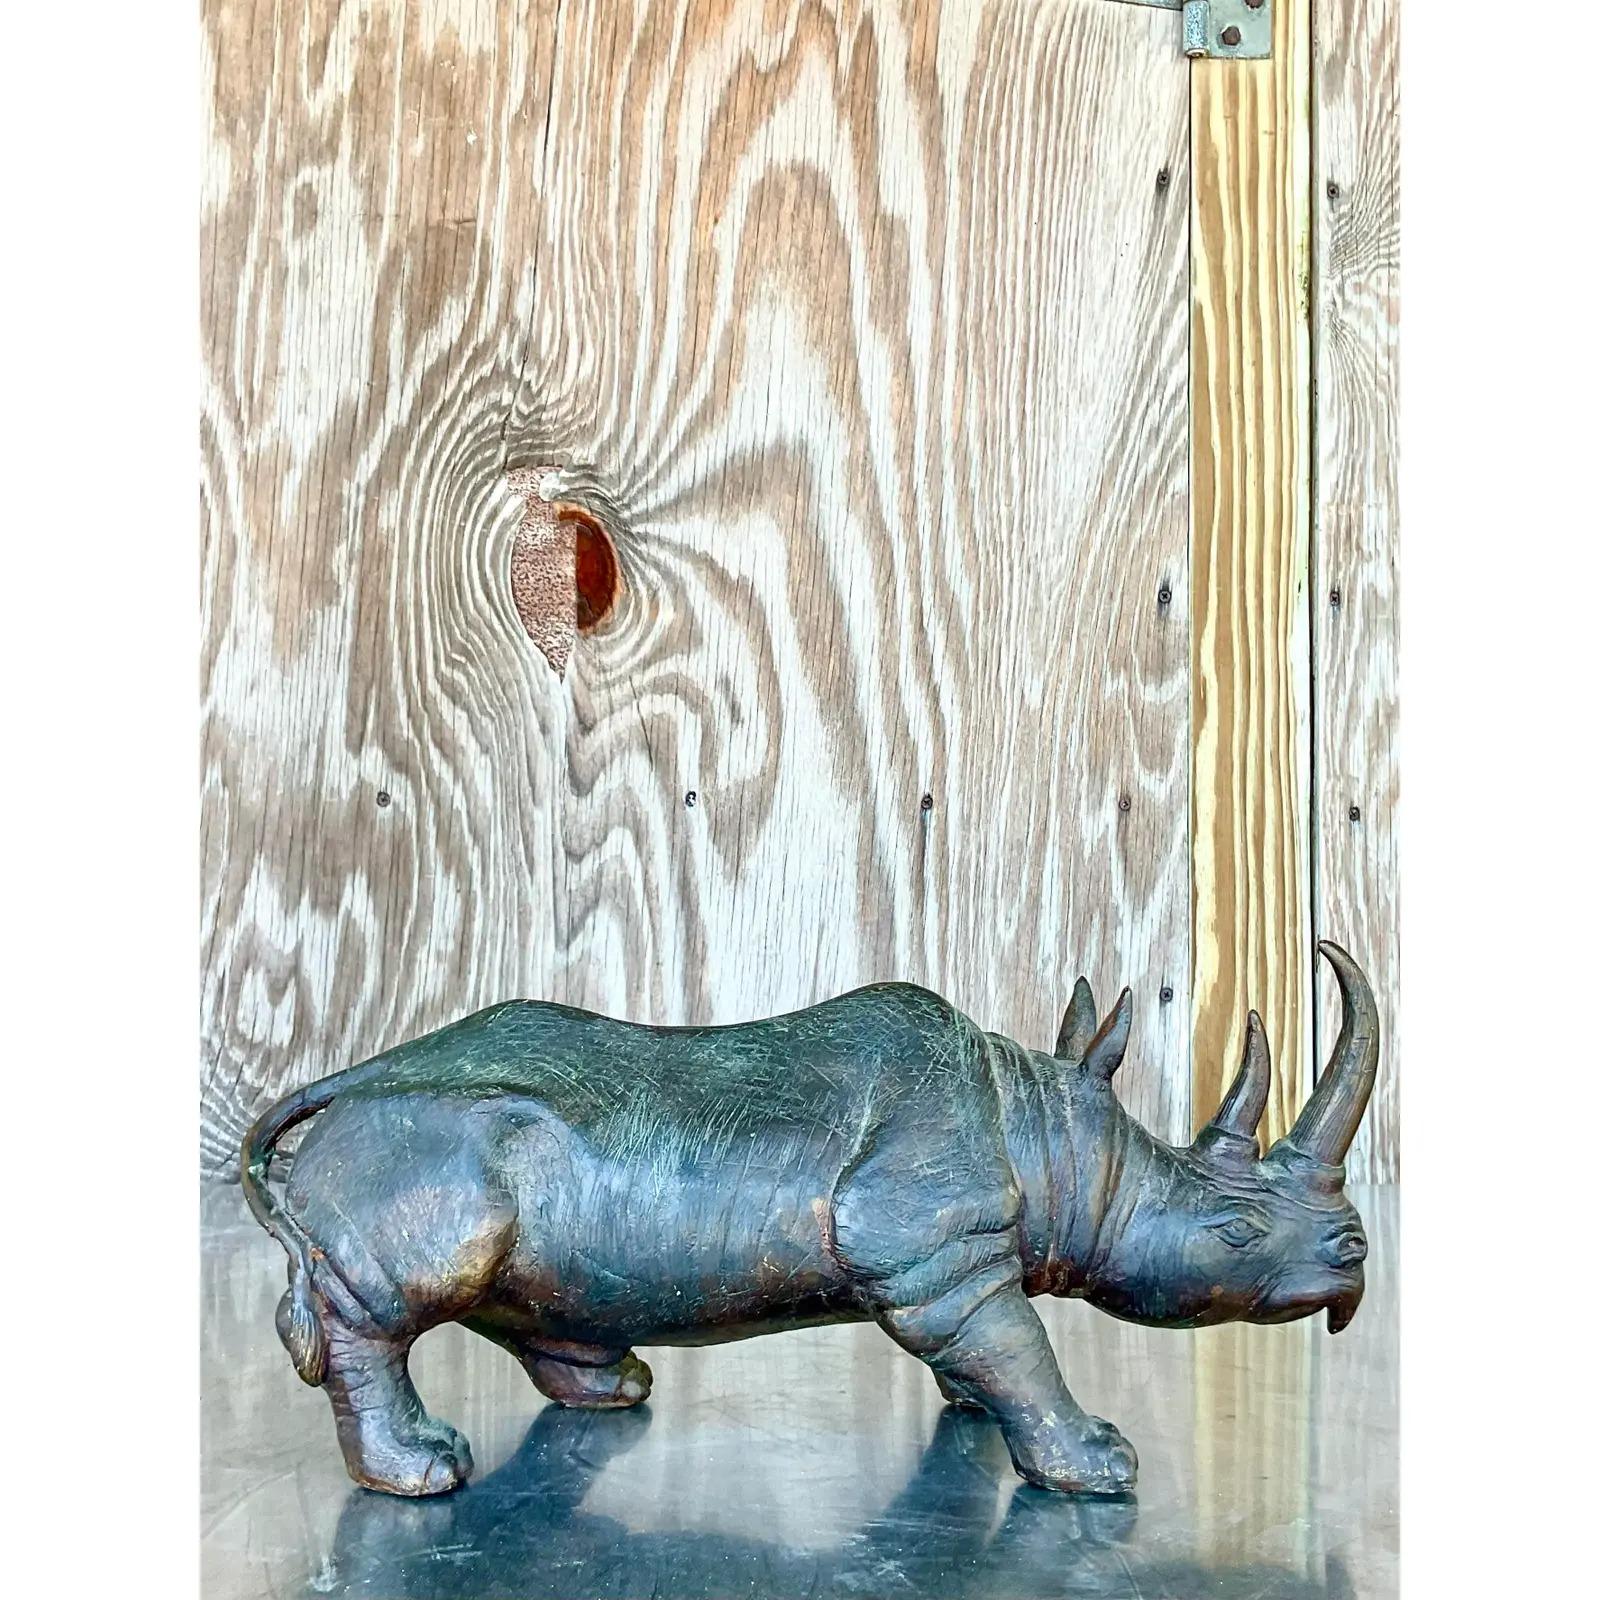 Fantastic vintage bronze statue. A solid composition of a handsome rhino. Beautiful attention to detail and amazing patina from time. Acquired from a Palm Beach estate. Fantastic vintage bronze statue. A solid composition of a handsome rhino.